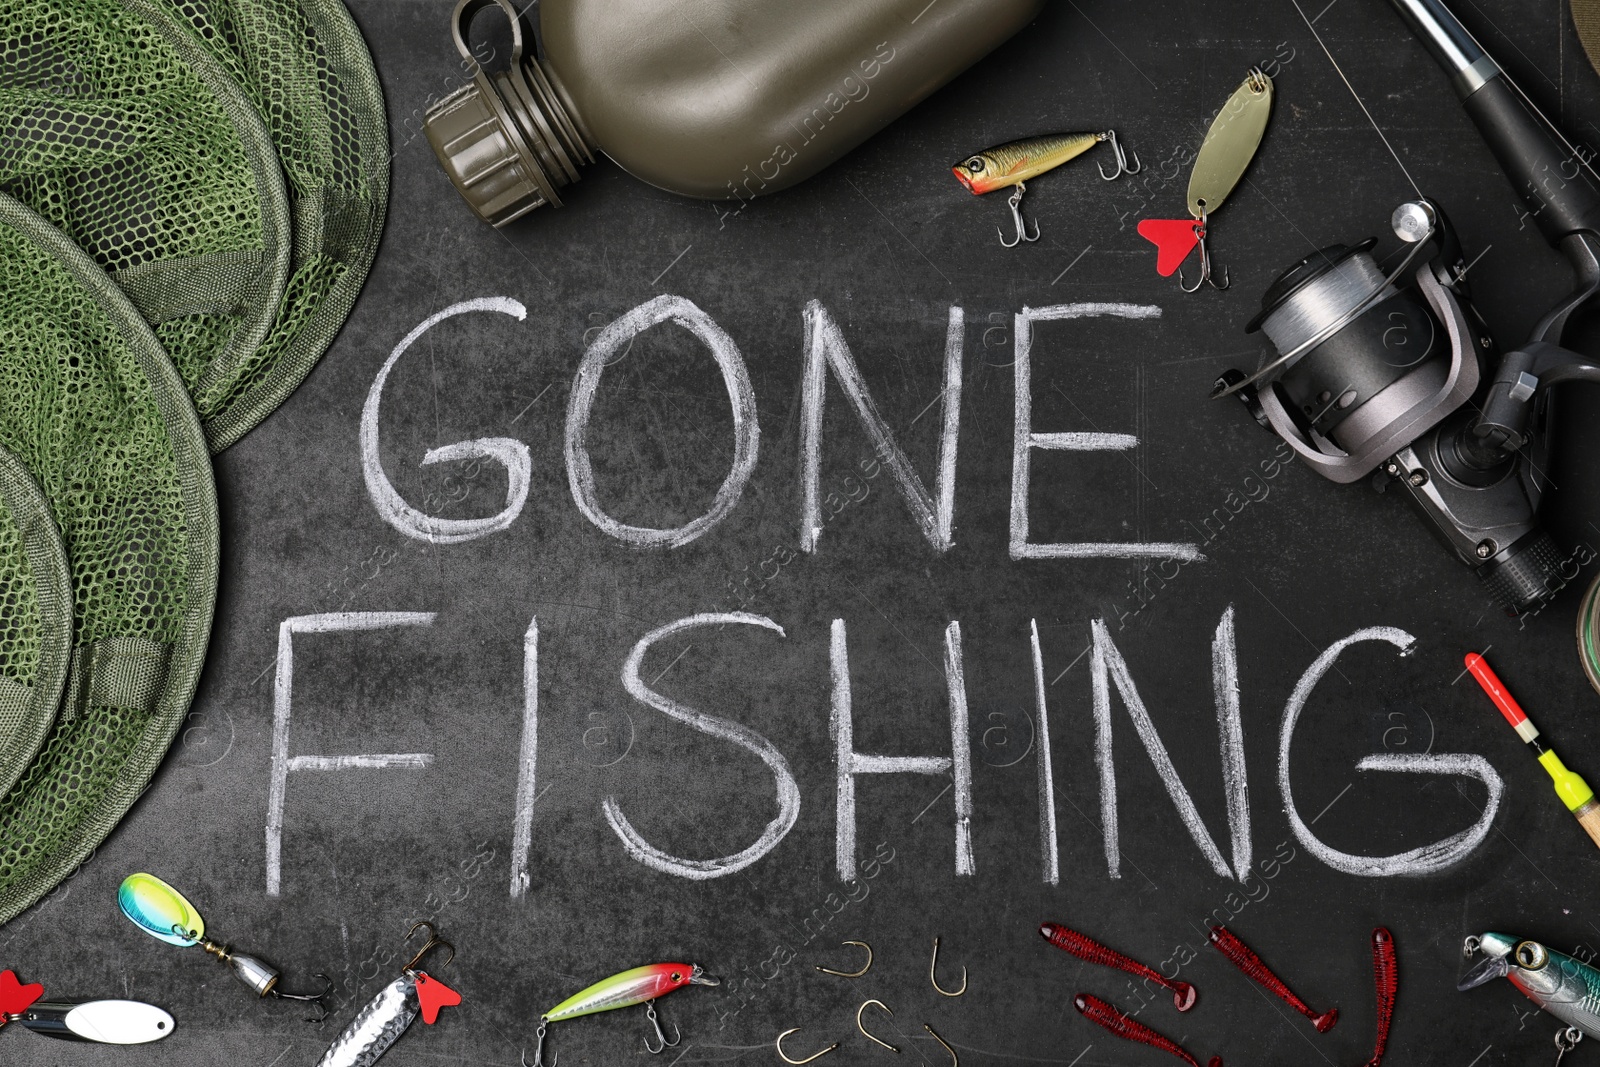 Photo of Flat lay composition with angling equipment and words "GONE FISHING" on dark background